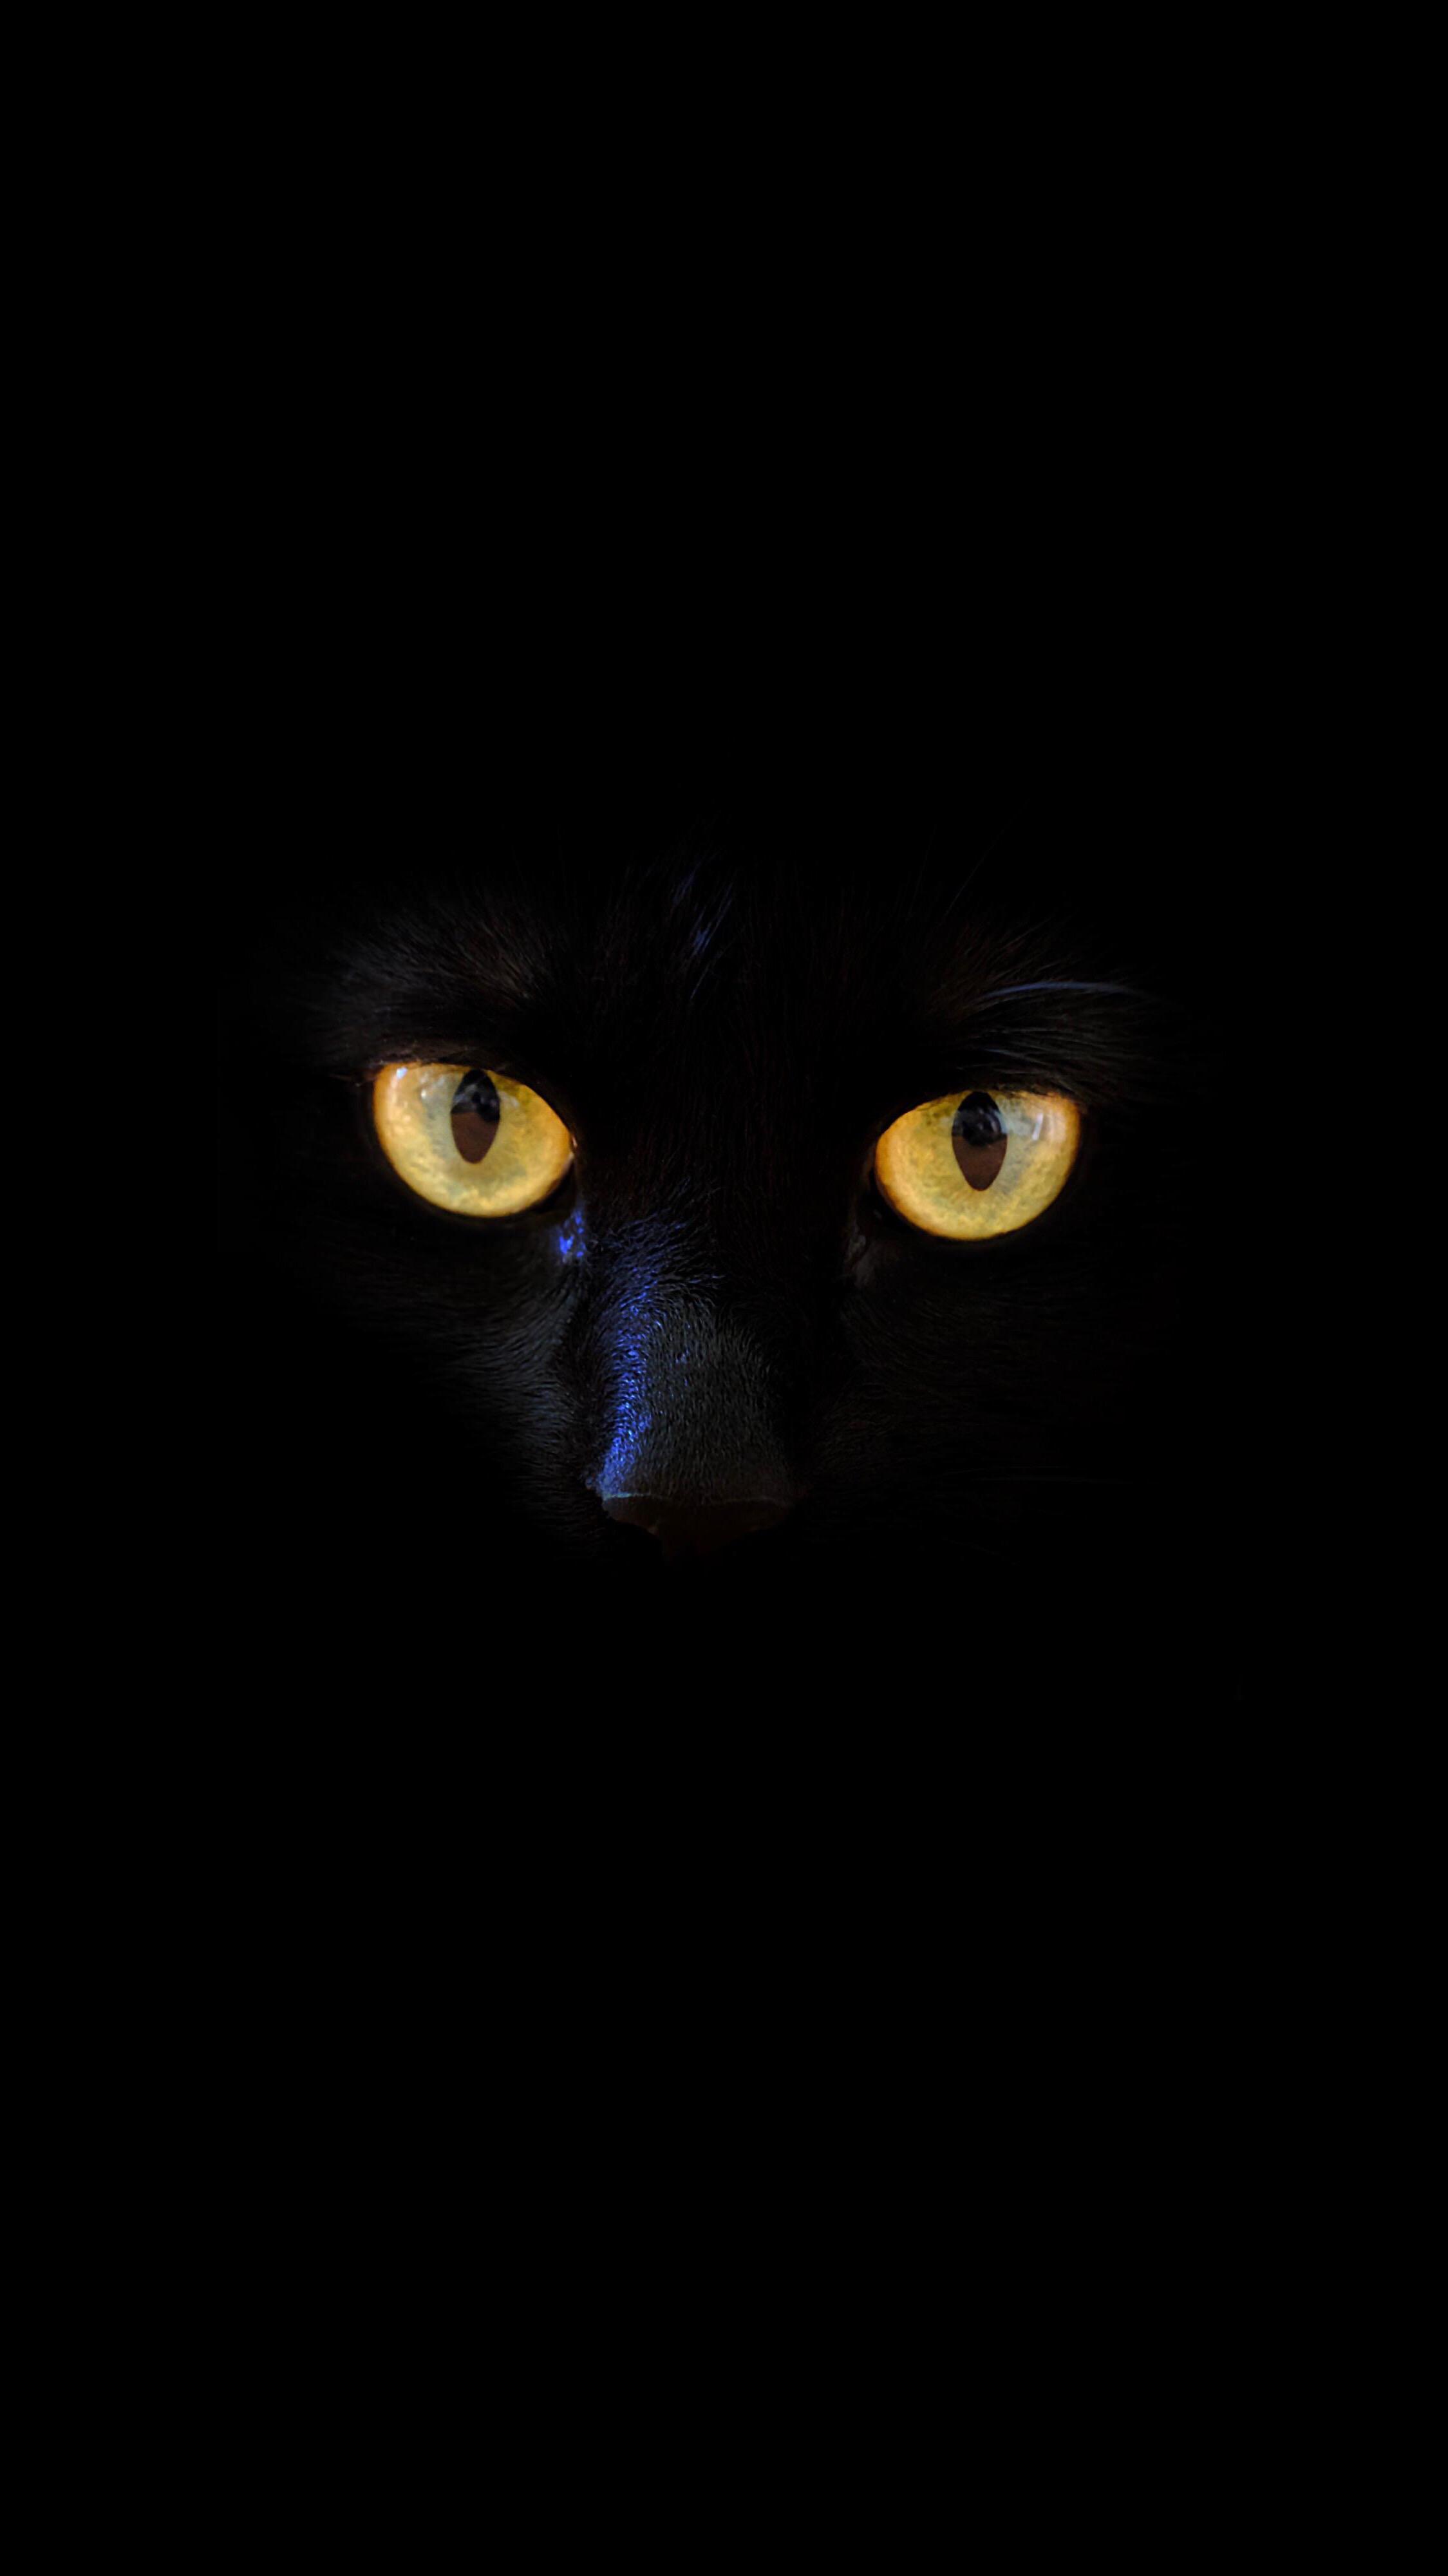 Very Great Background Wallpaper For iPhone I Love Black Cats R